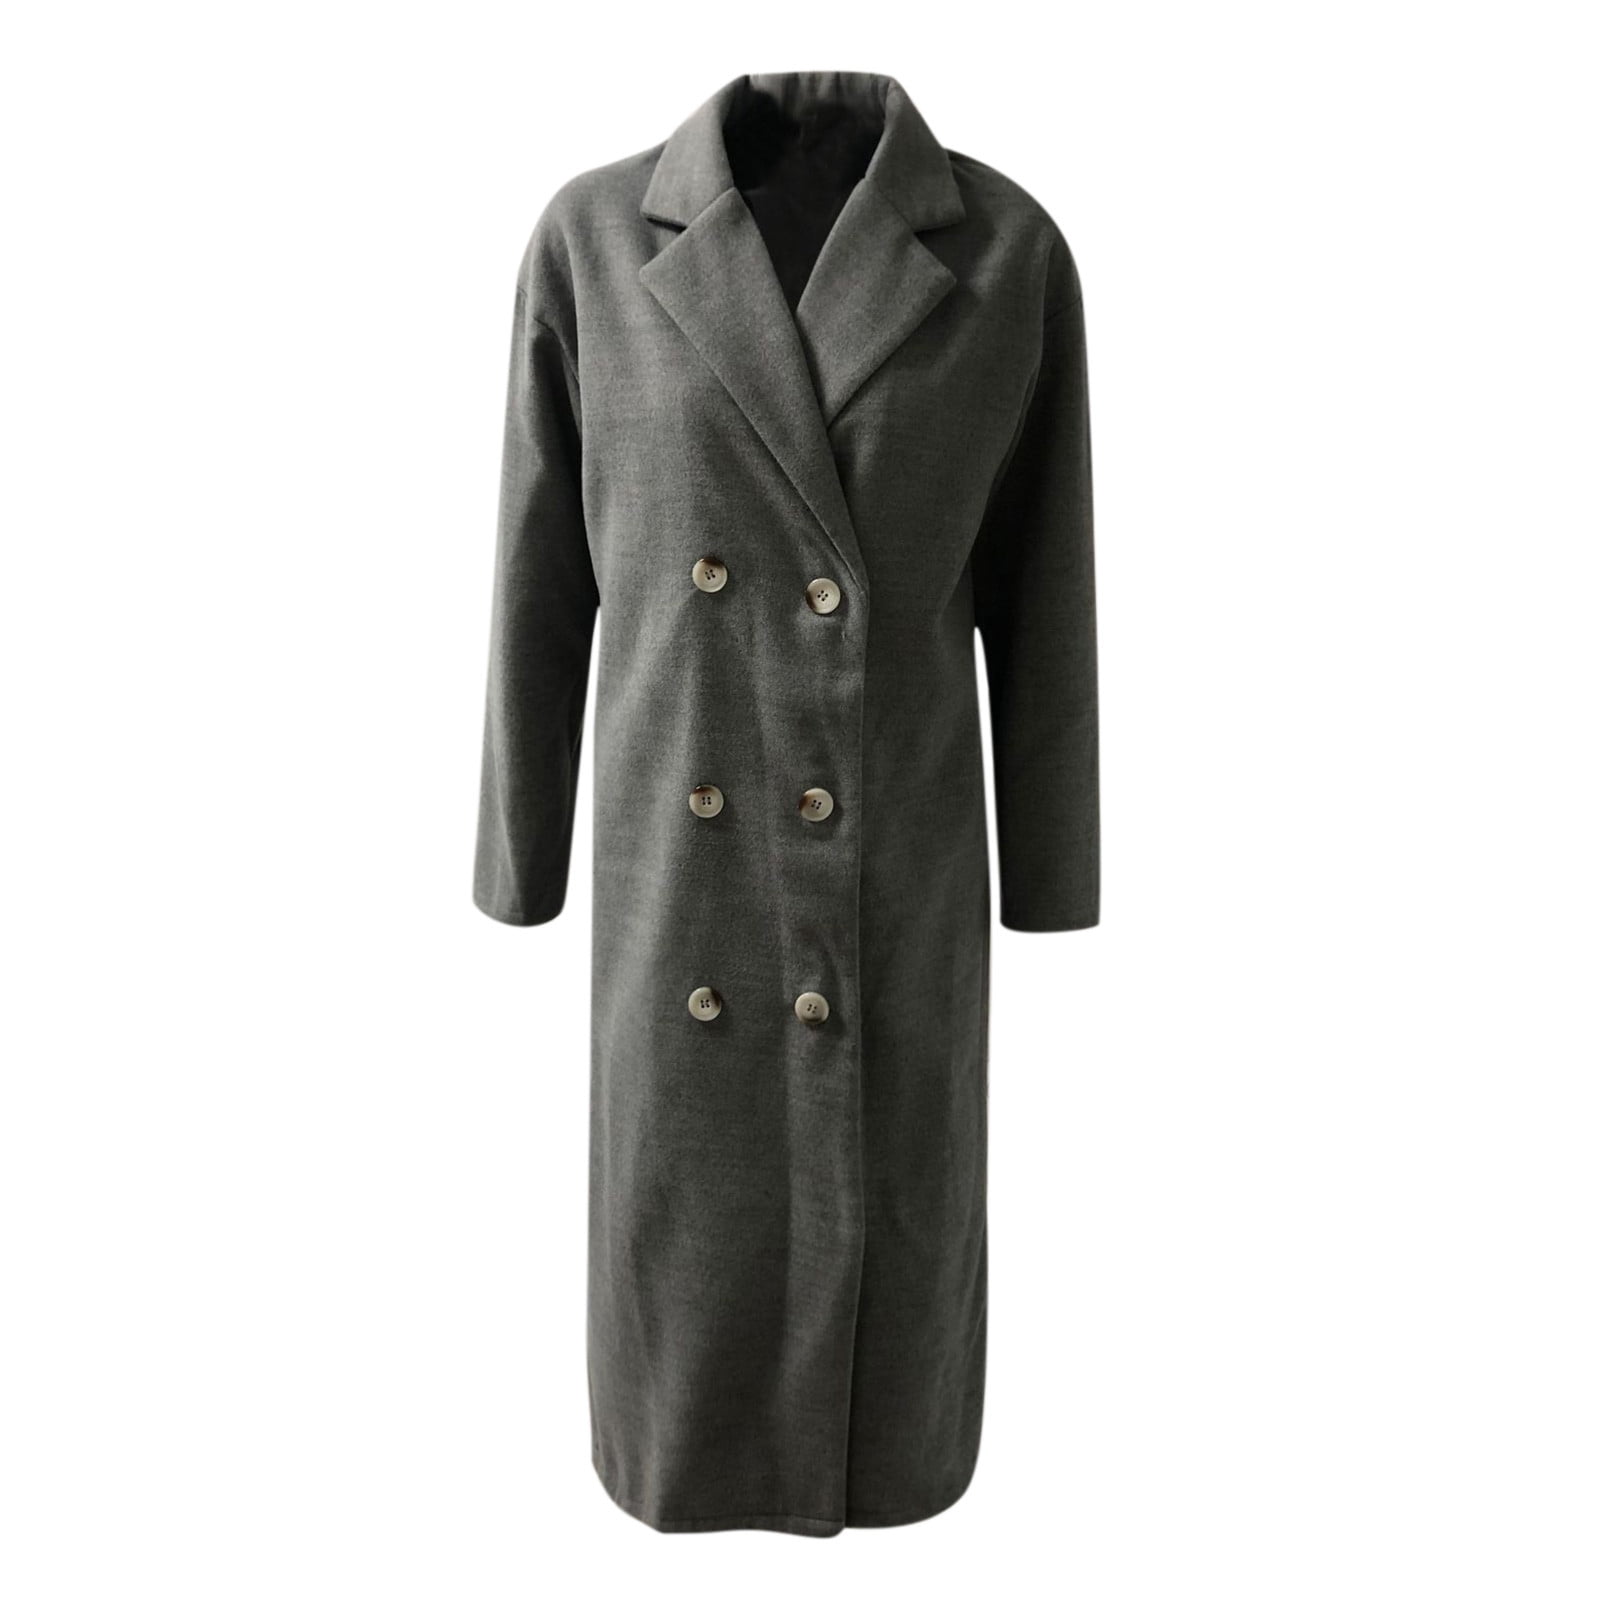 Elegant Slim Wool Blend Womens Long Sleeve Coats And Jackets With Turn Down  Collar For Casual Autumn/Winter Wear From Blueberry11, $15.34